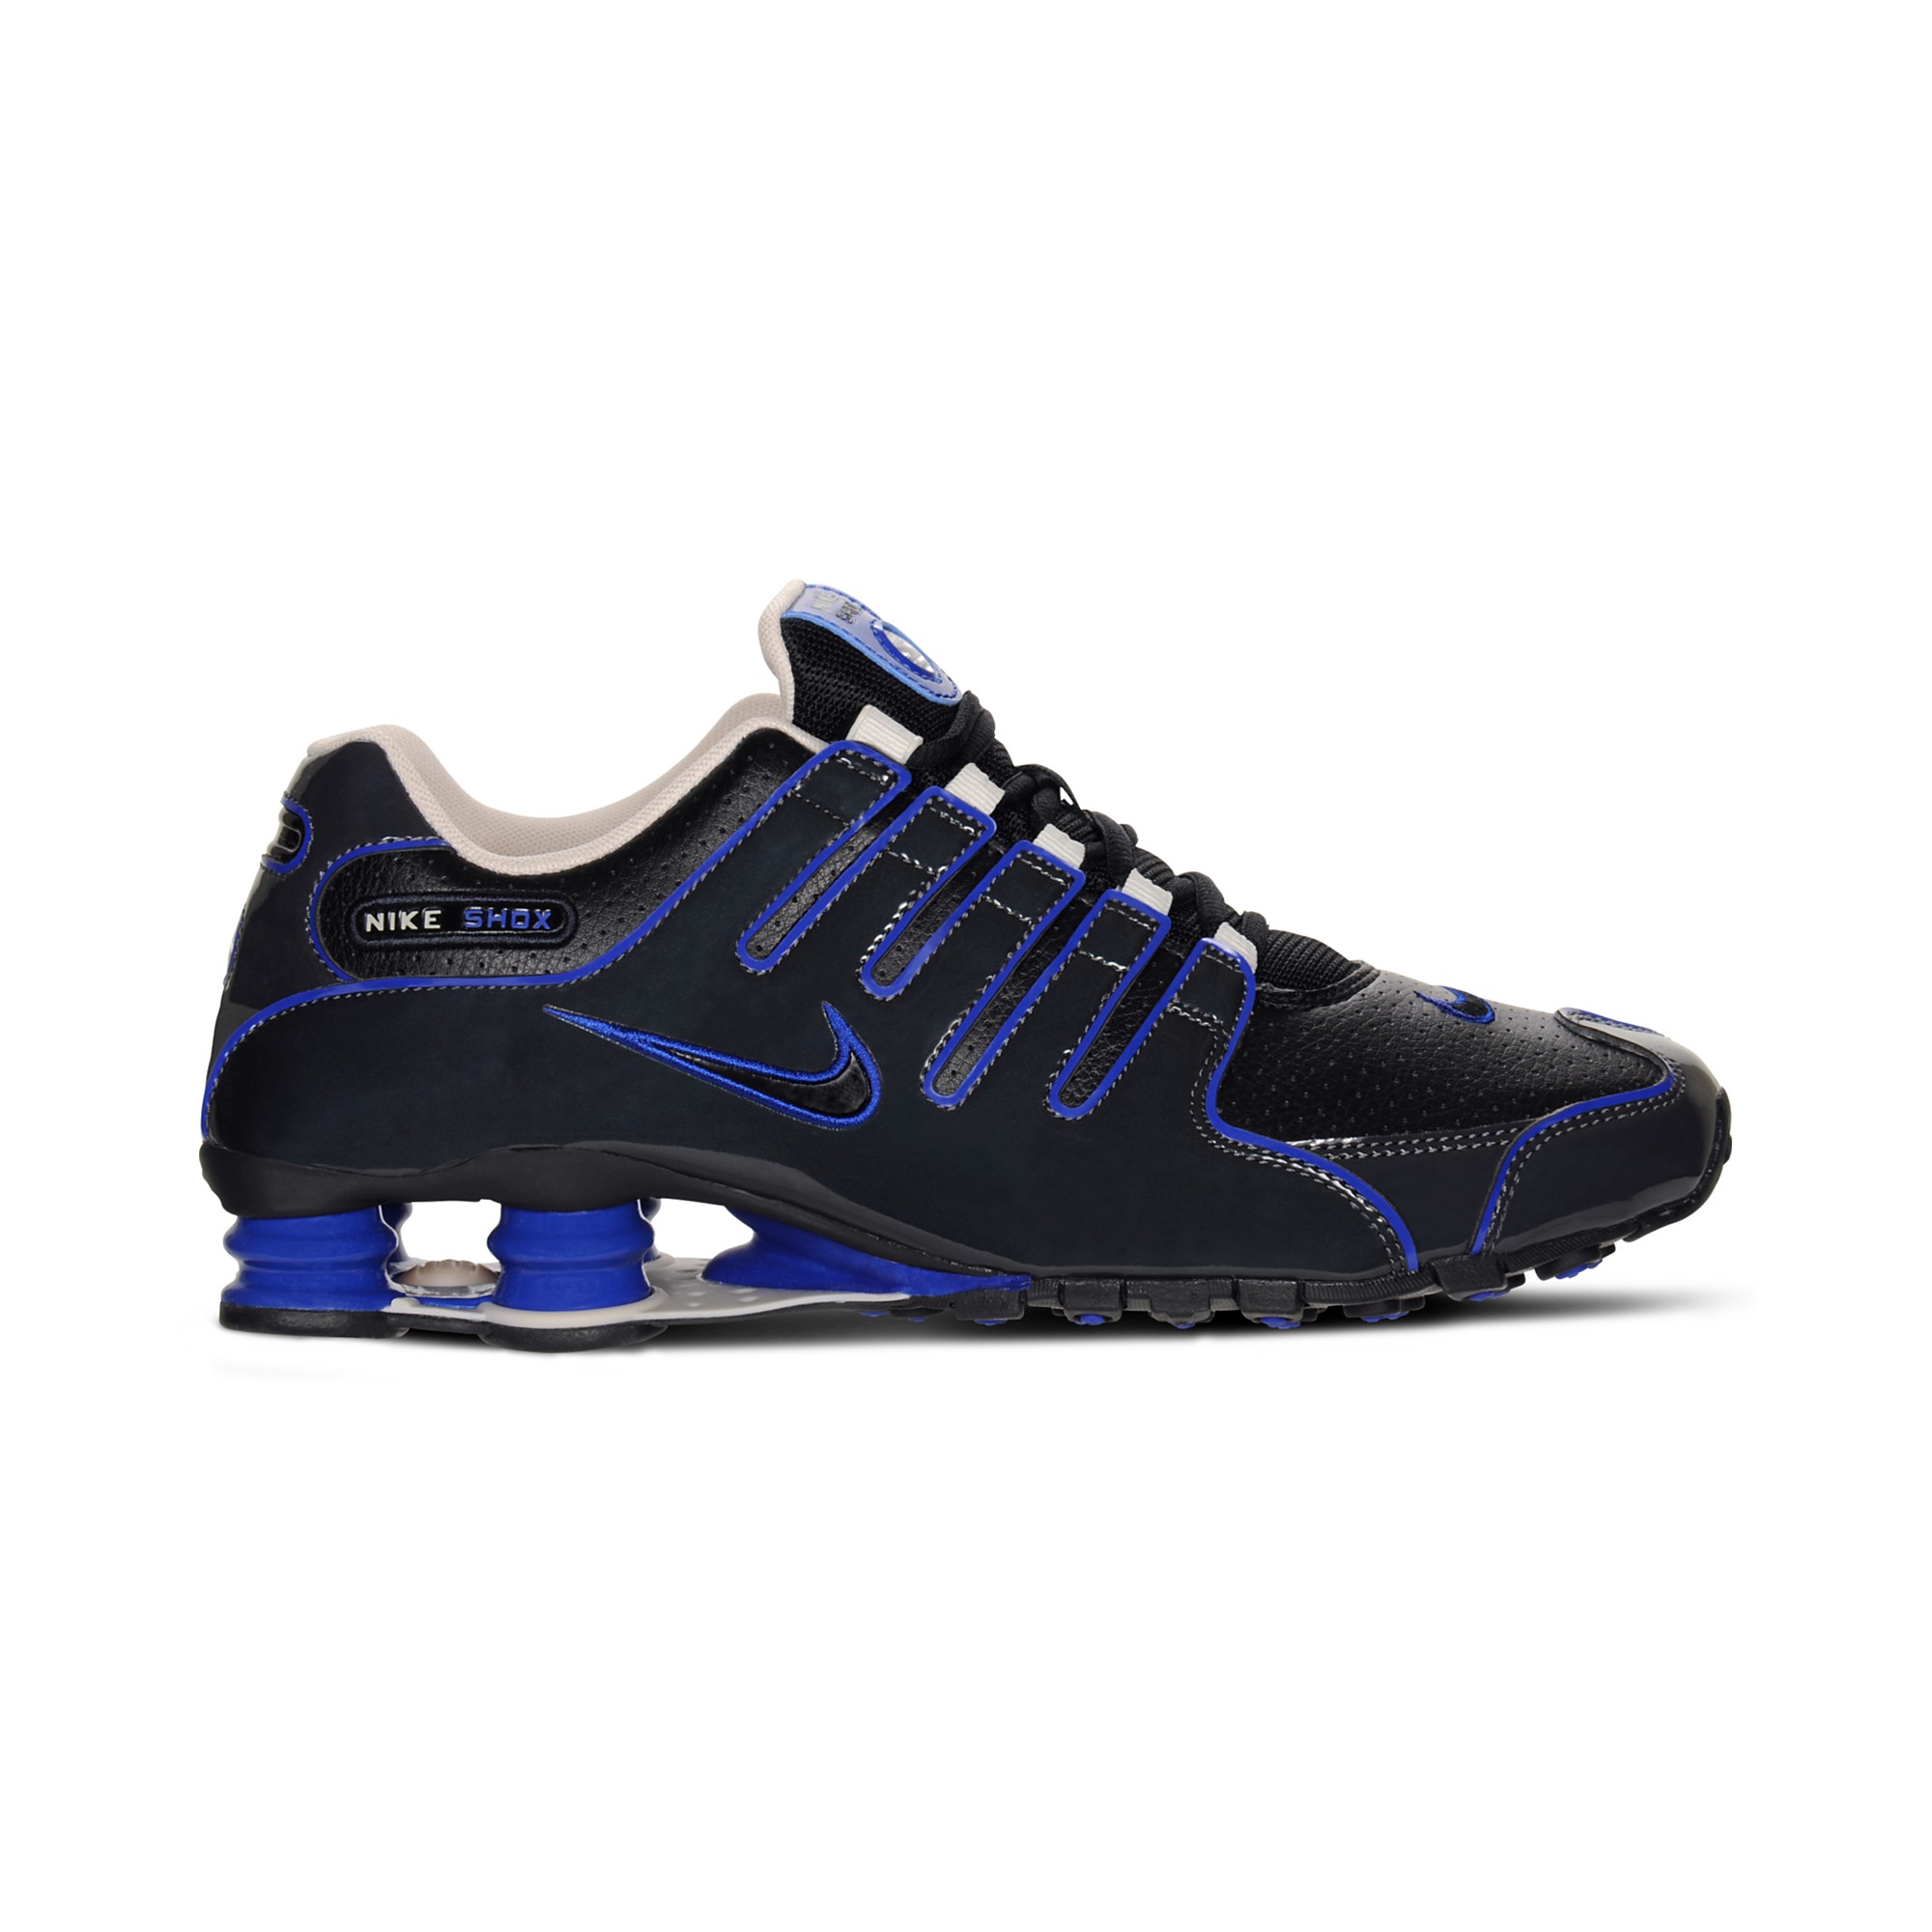 Nike Shox Nz Sneakers in Black/Anthracite/Blue (Black) for Men - Lyst